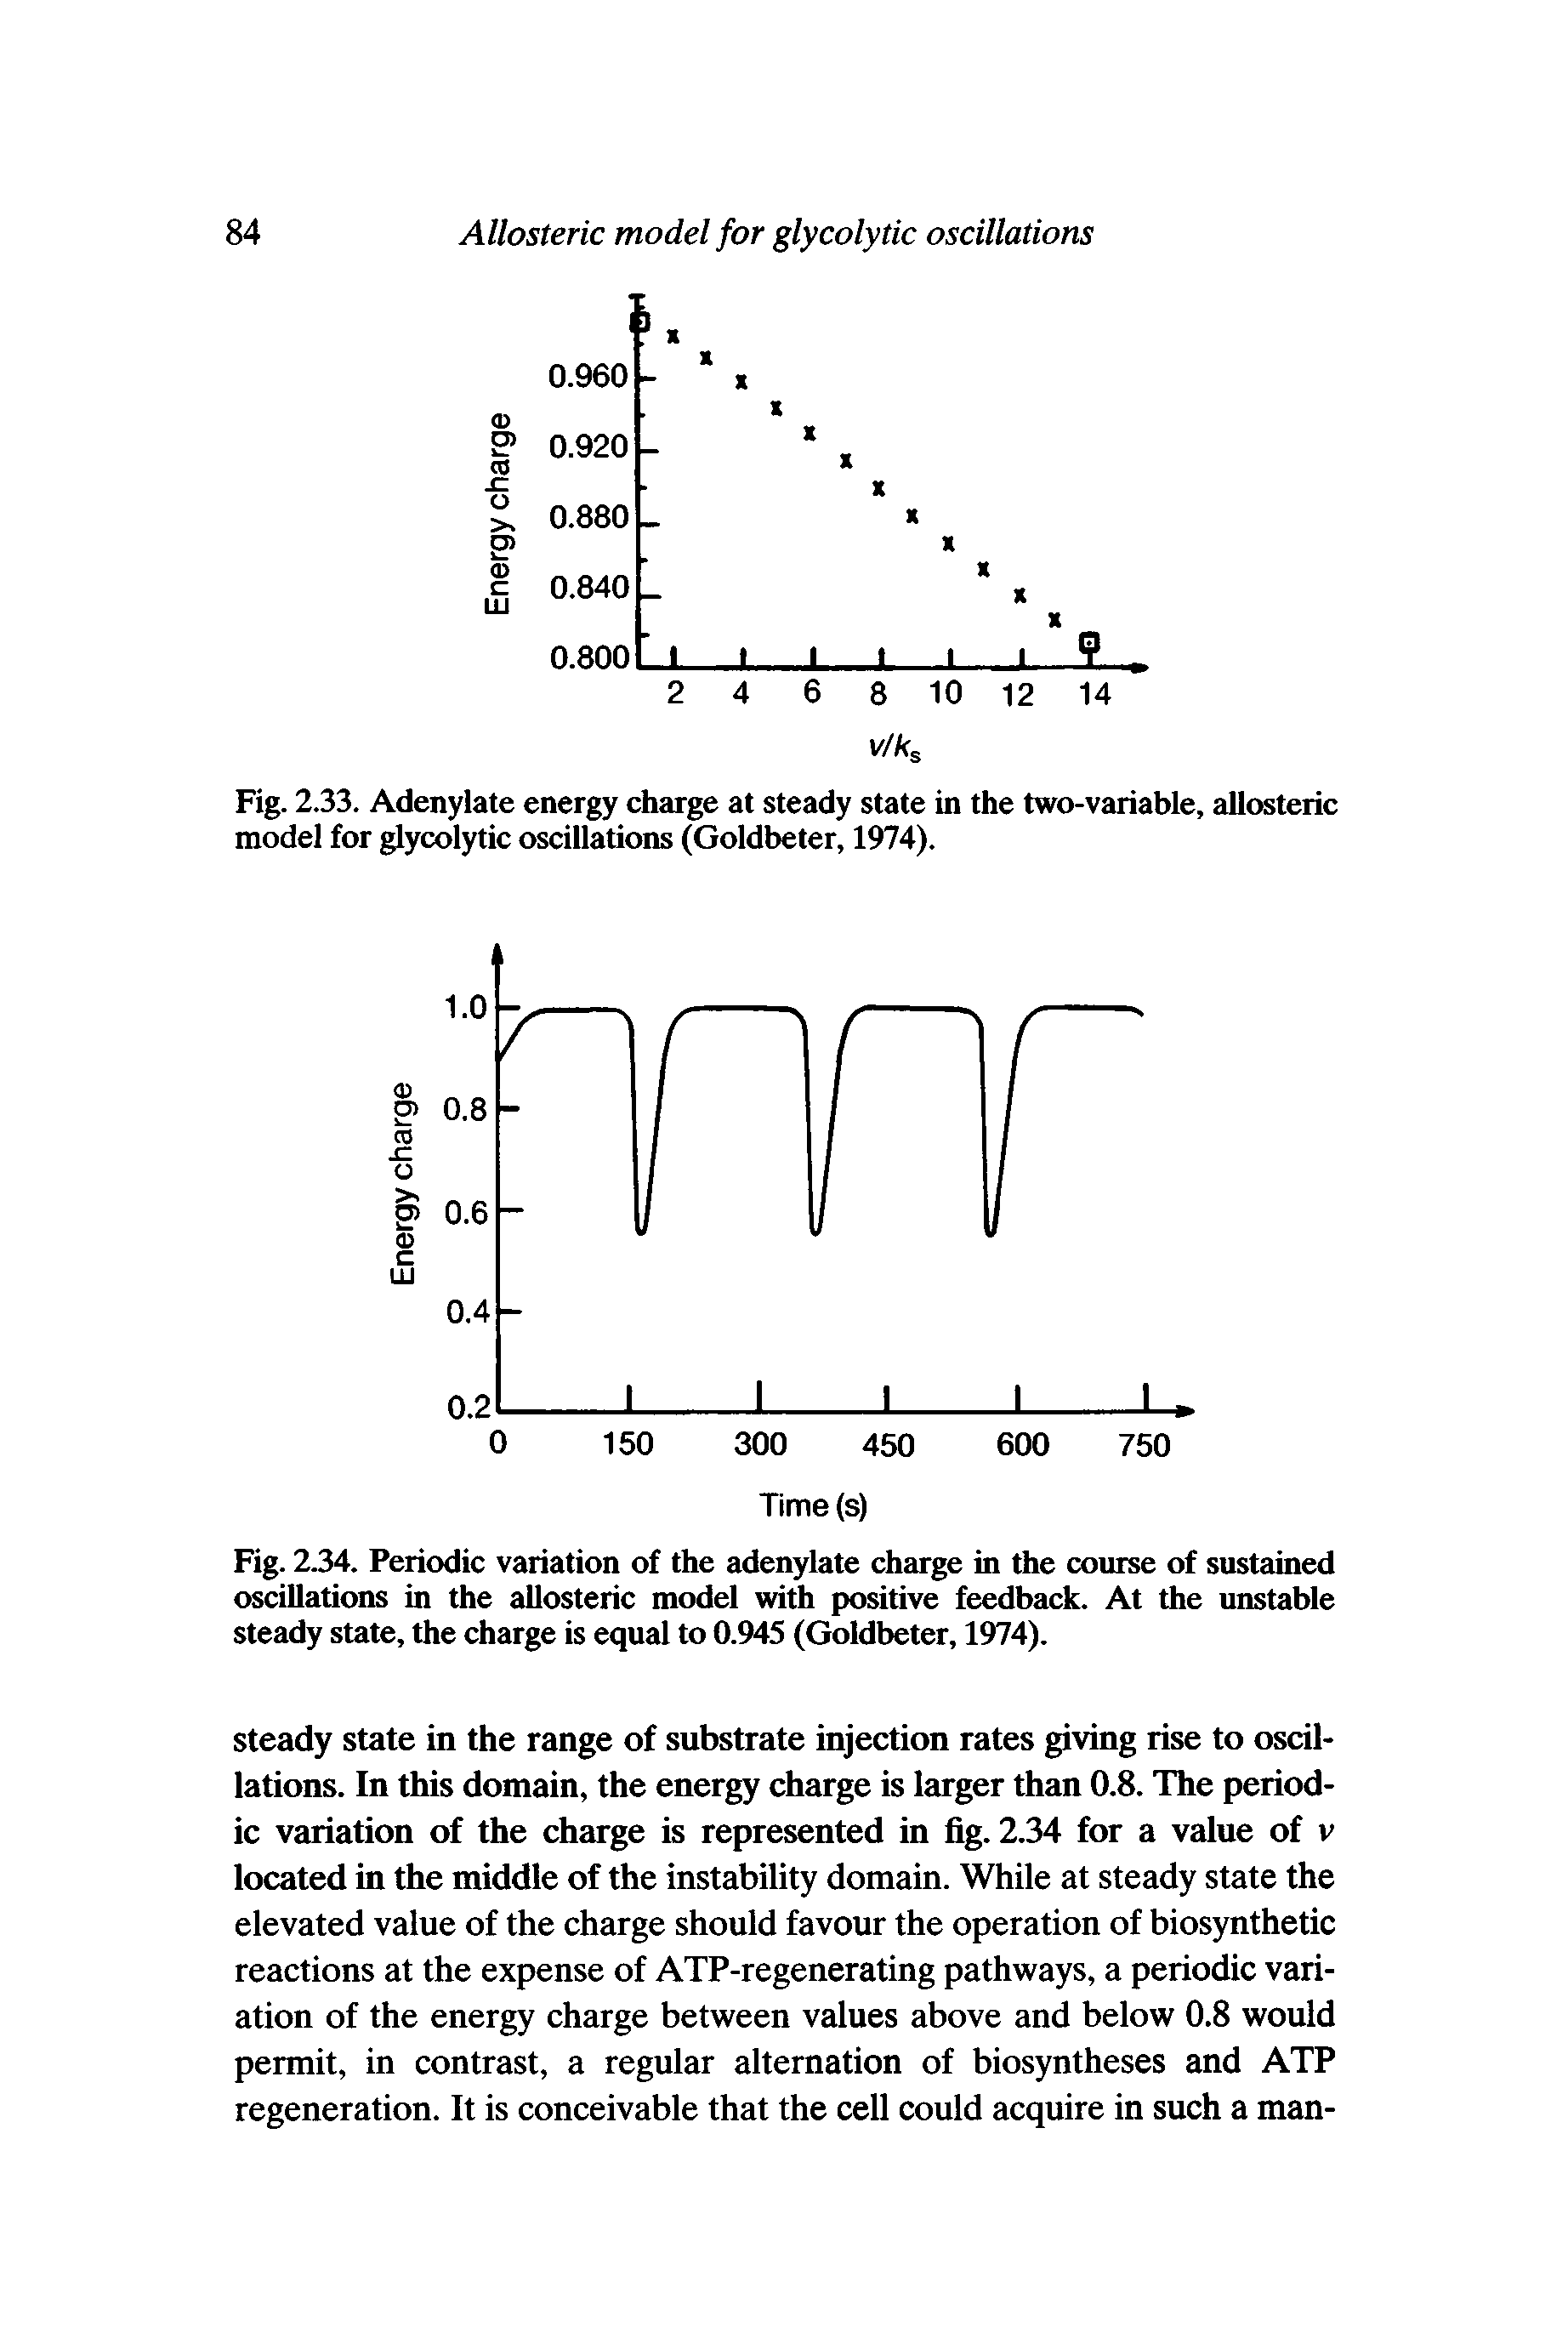 Fig. 2.33. Adenylate energy charge at steady state in the two-variable, allosteric model for glycolytic oscillations (Goldbeter, 1974).